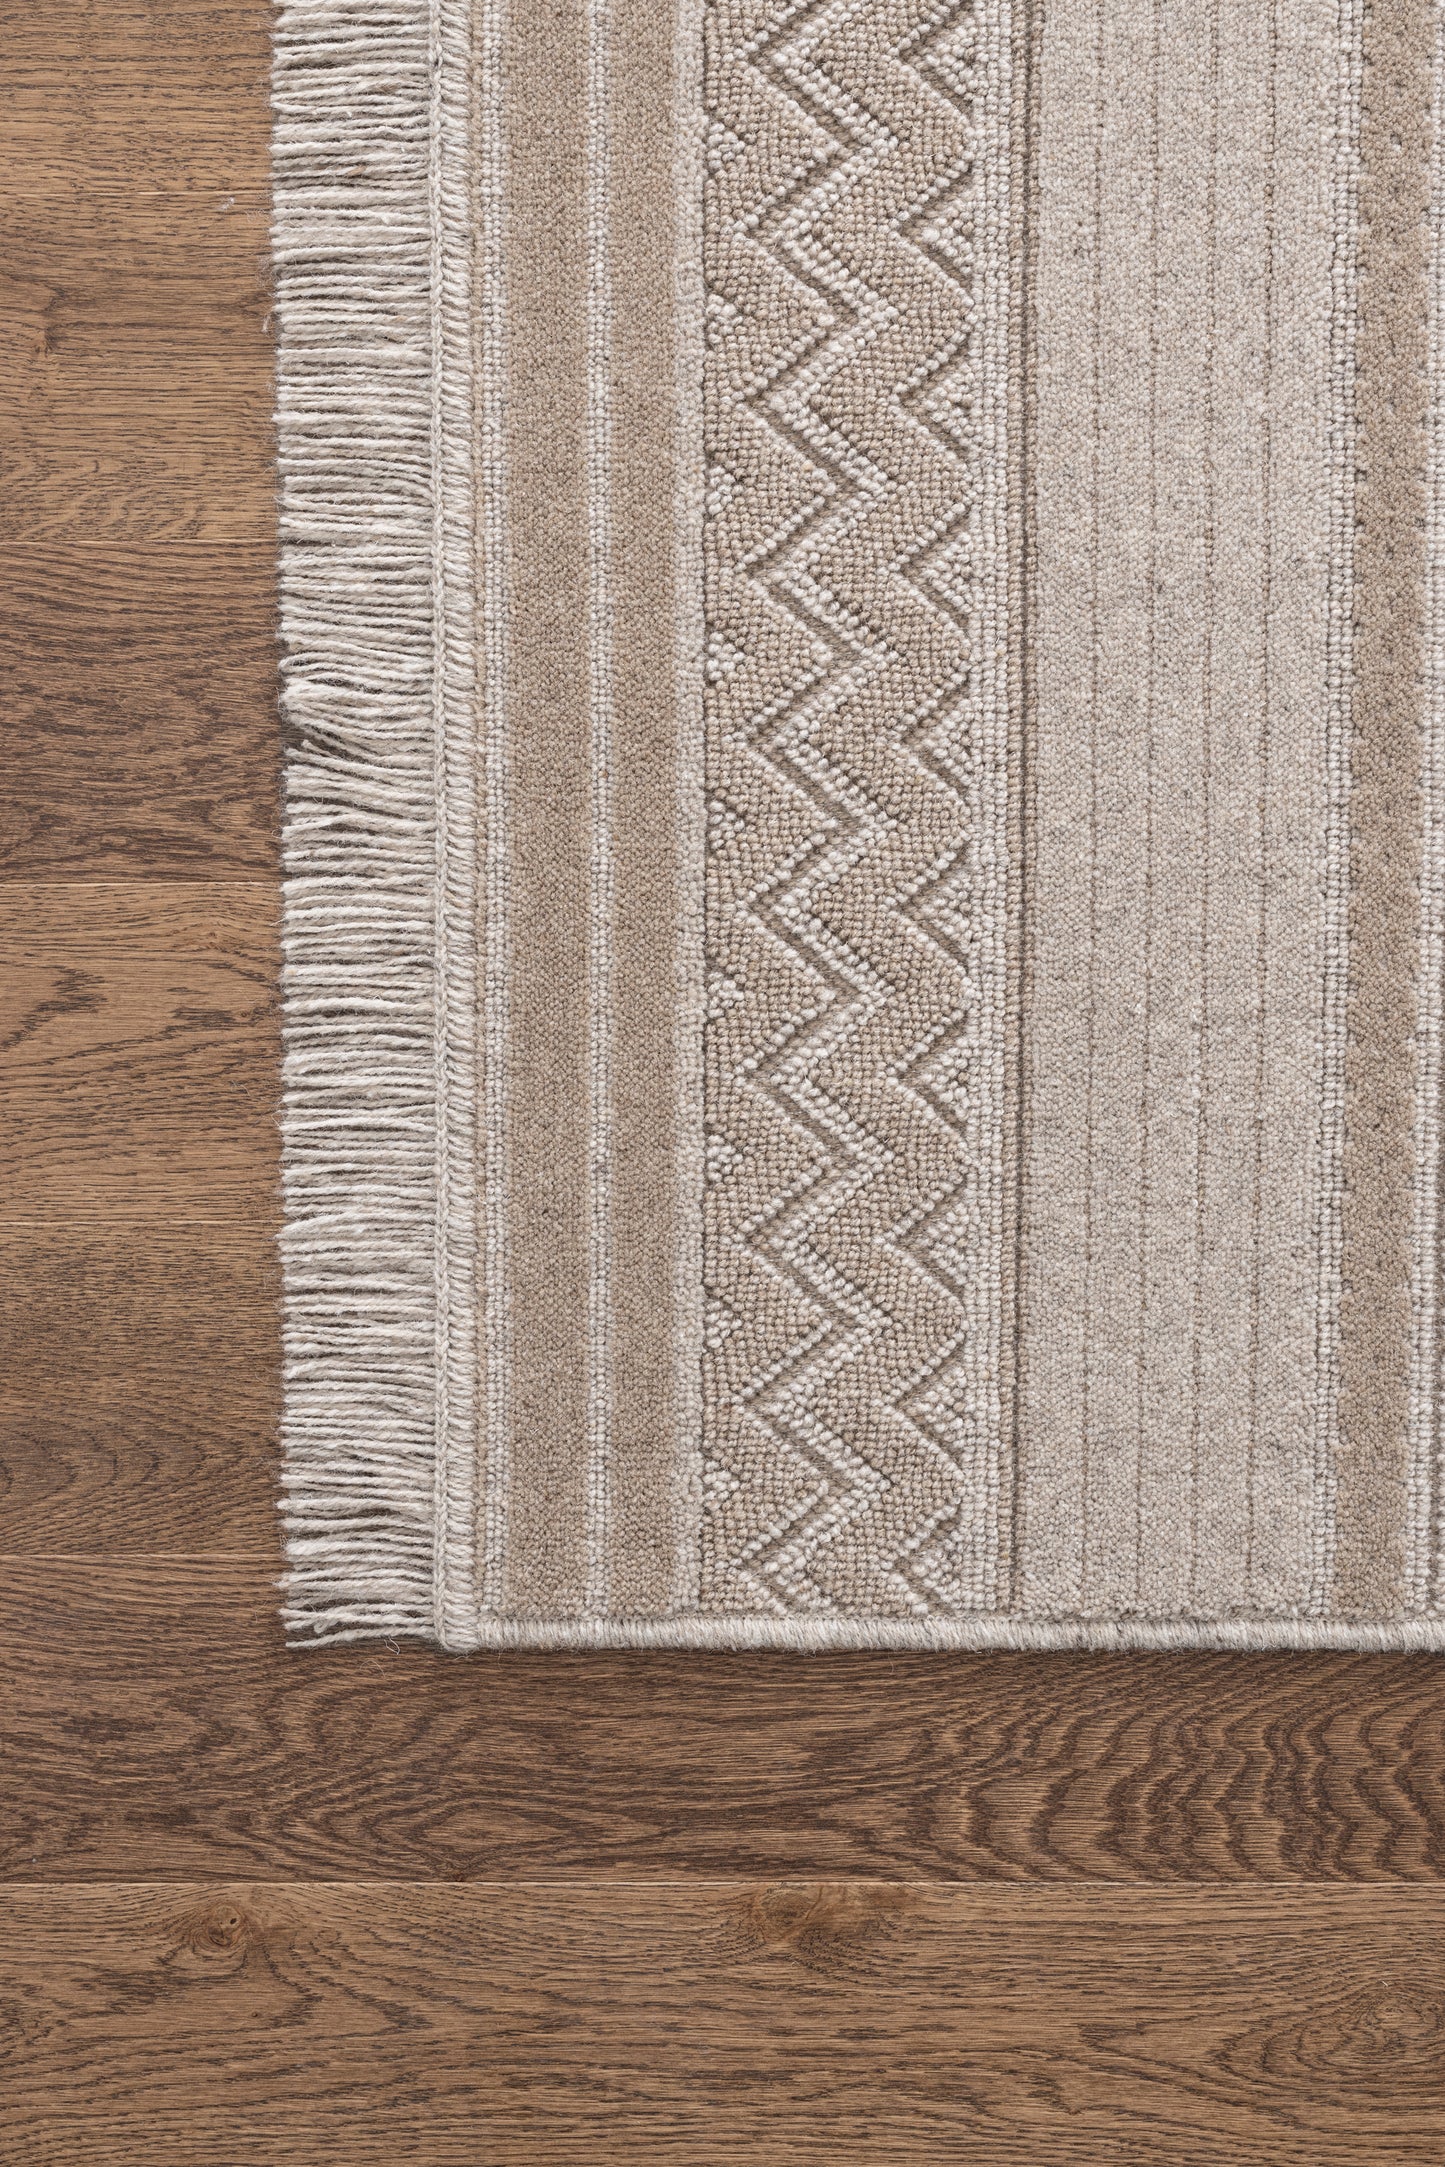 Agnella Rugs Noble ONI Light Beige - 100% Undyed British Wool - Free Delivery